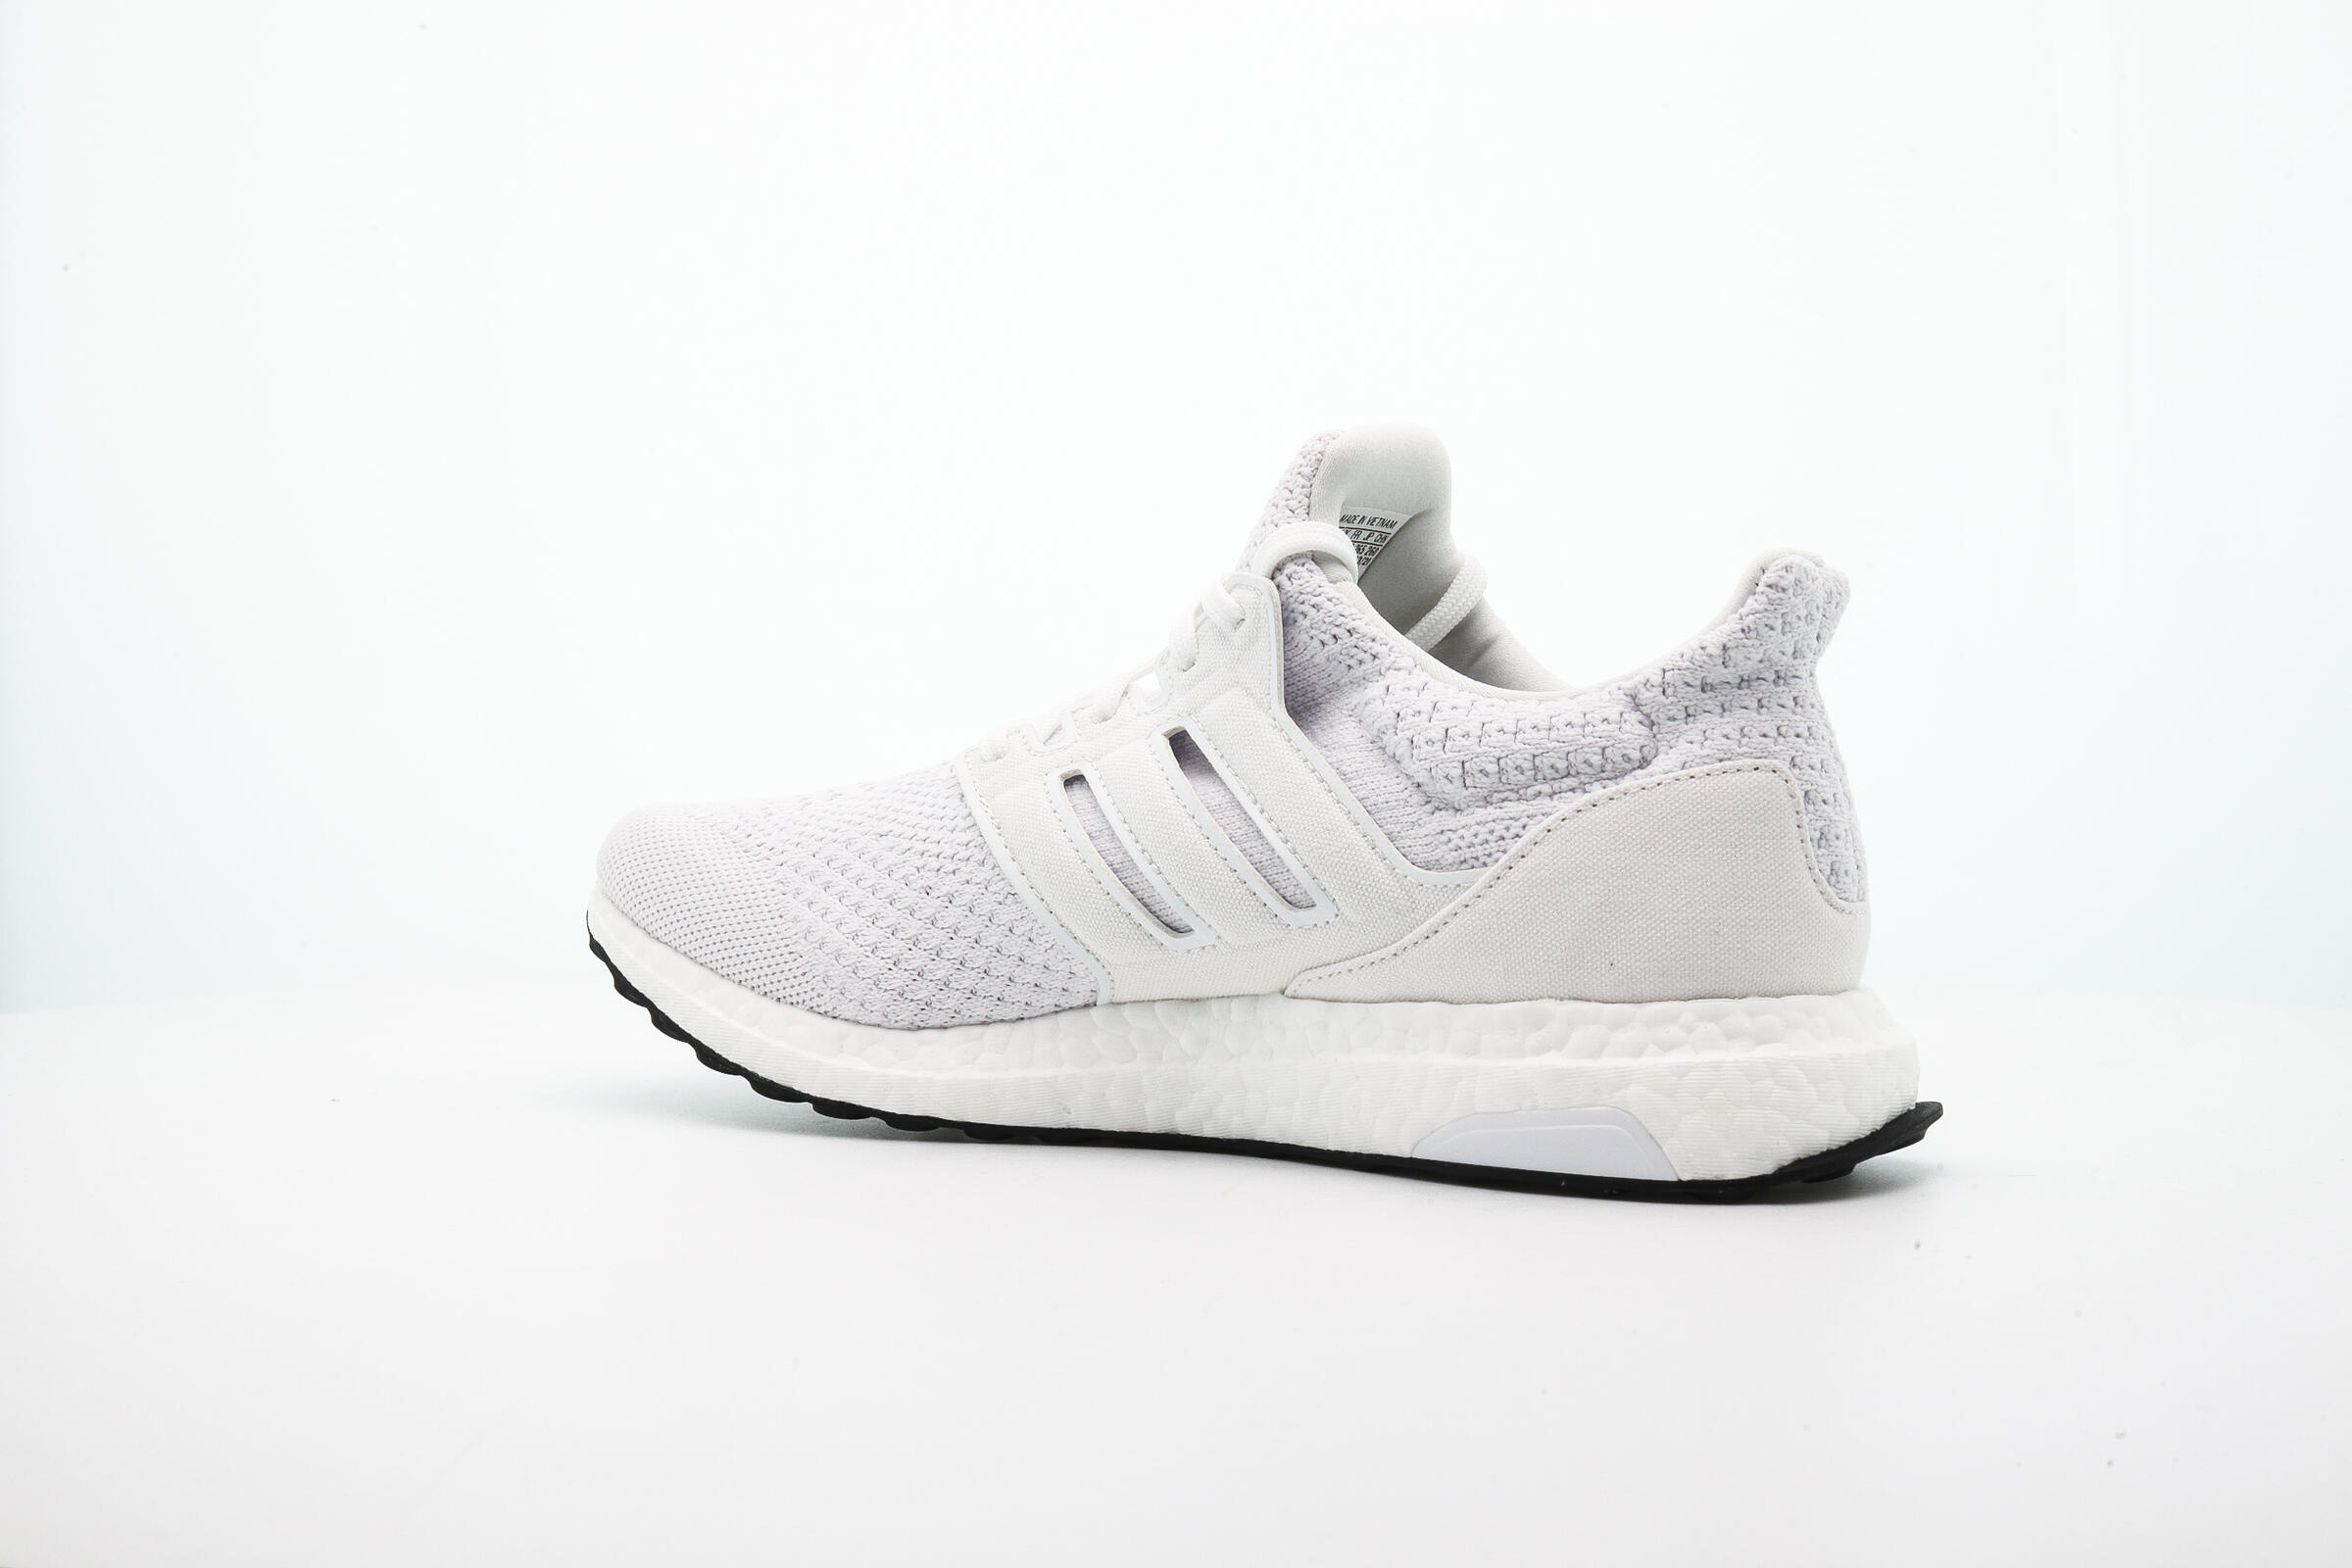 adidas Performance ULTRABOOST 5.0 DNA "WHITE"